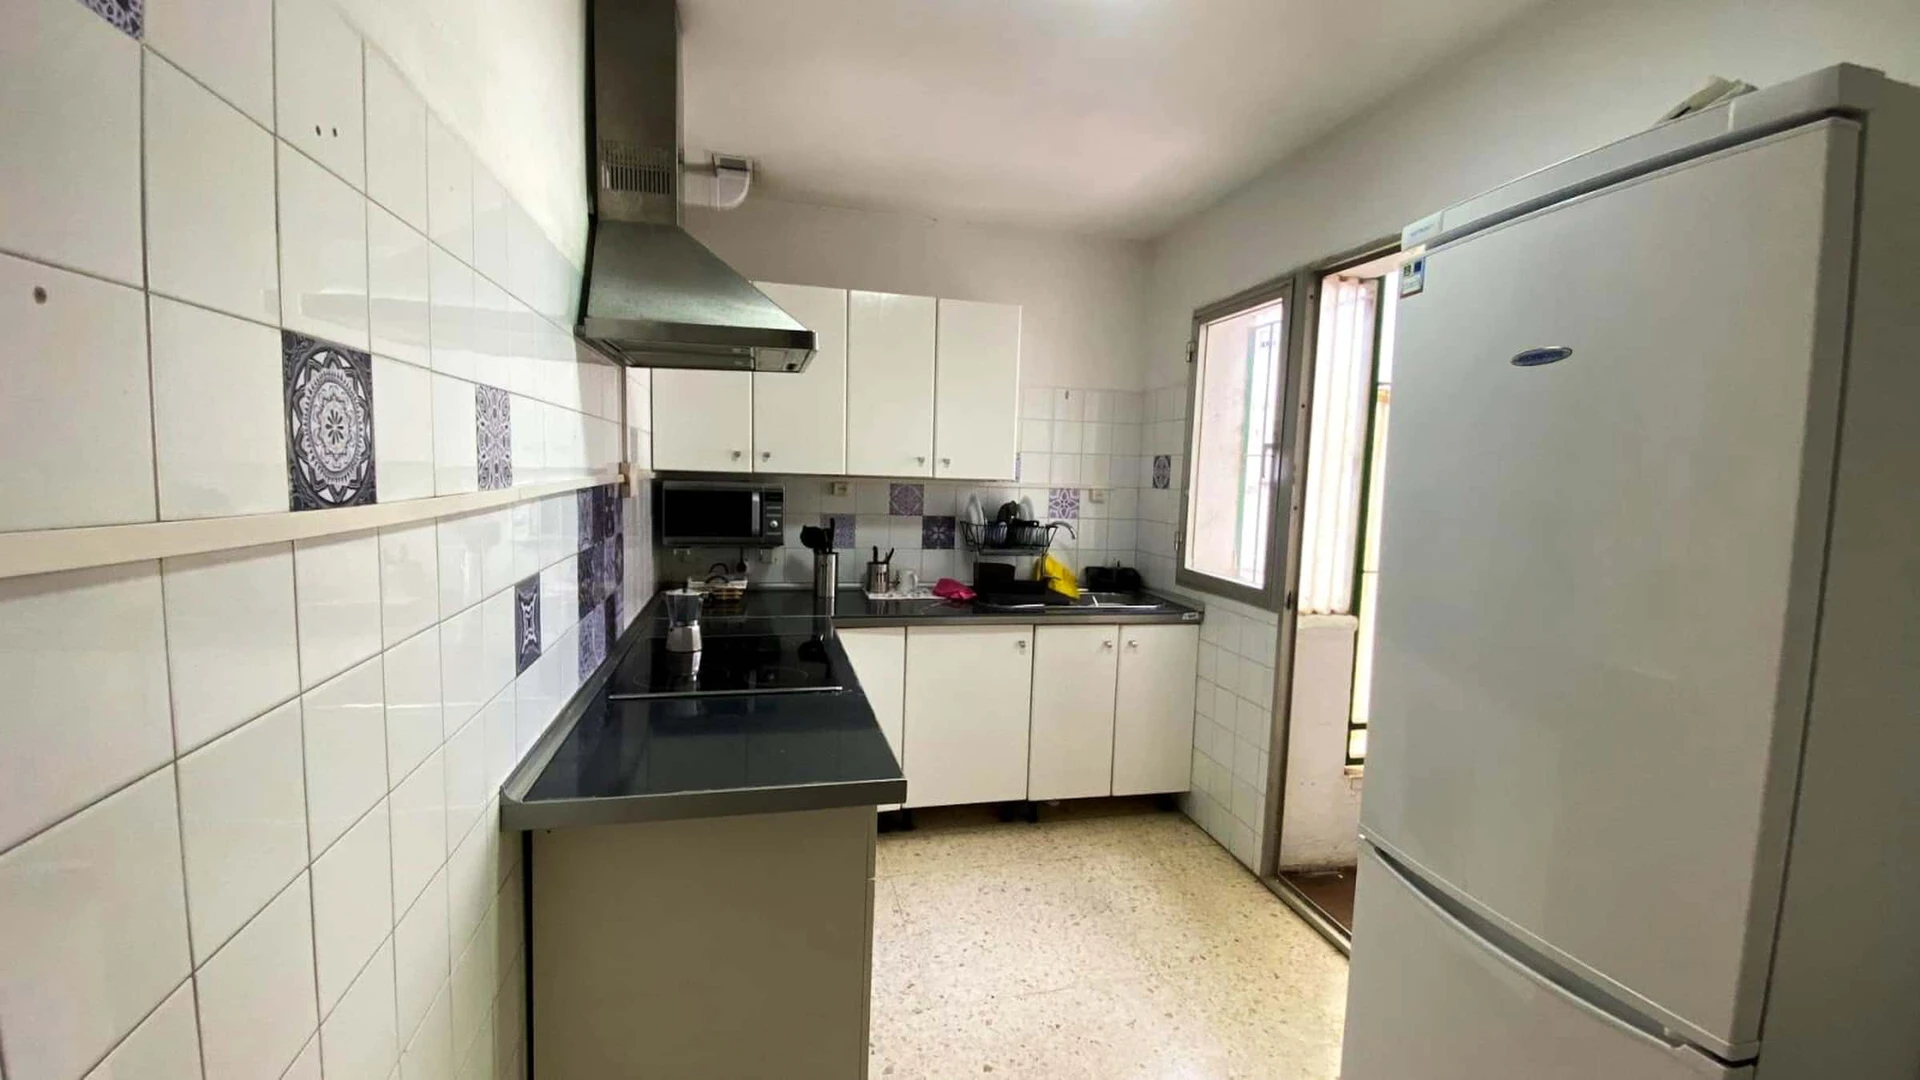 Room for rent in a shared flat in Cartagena